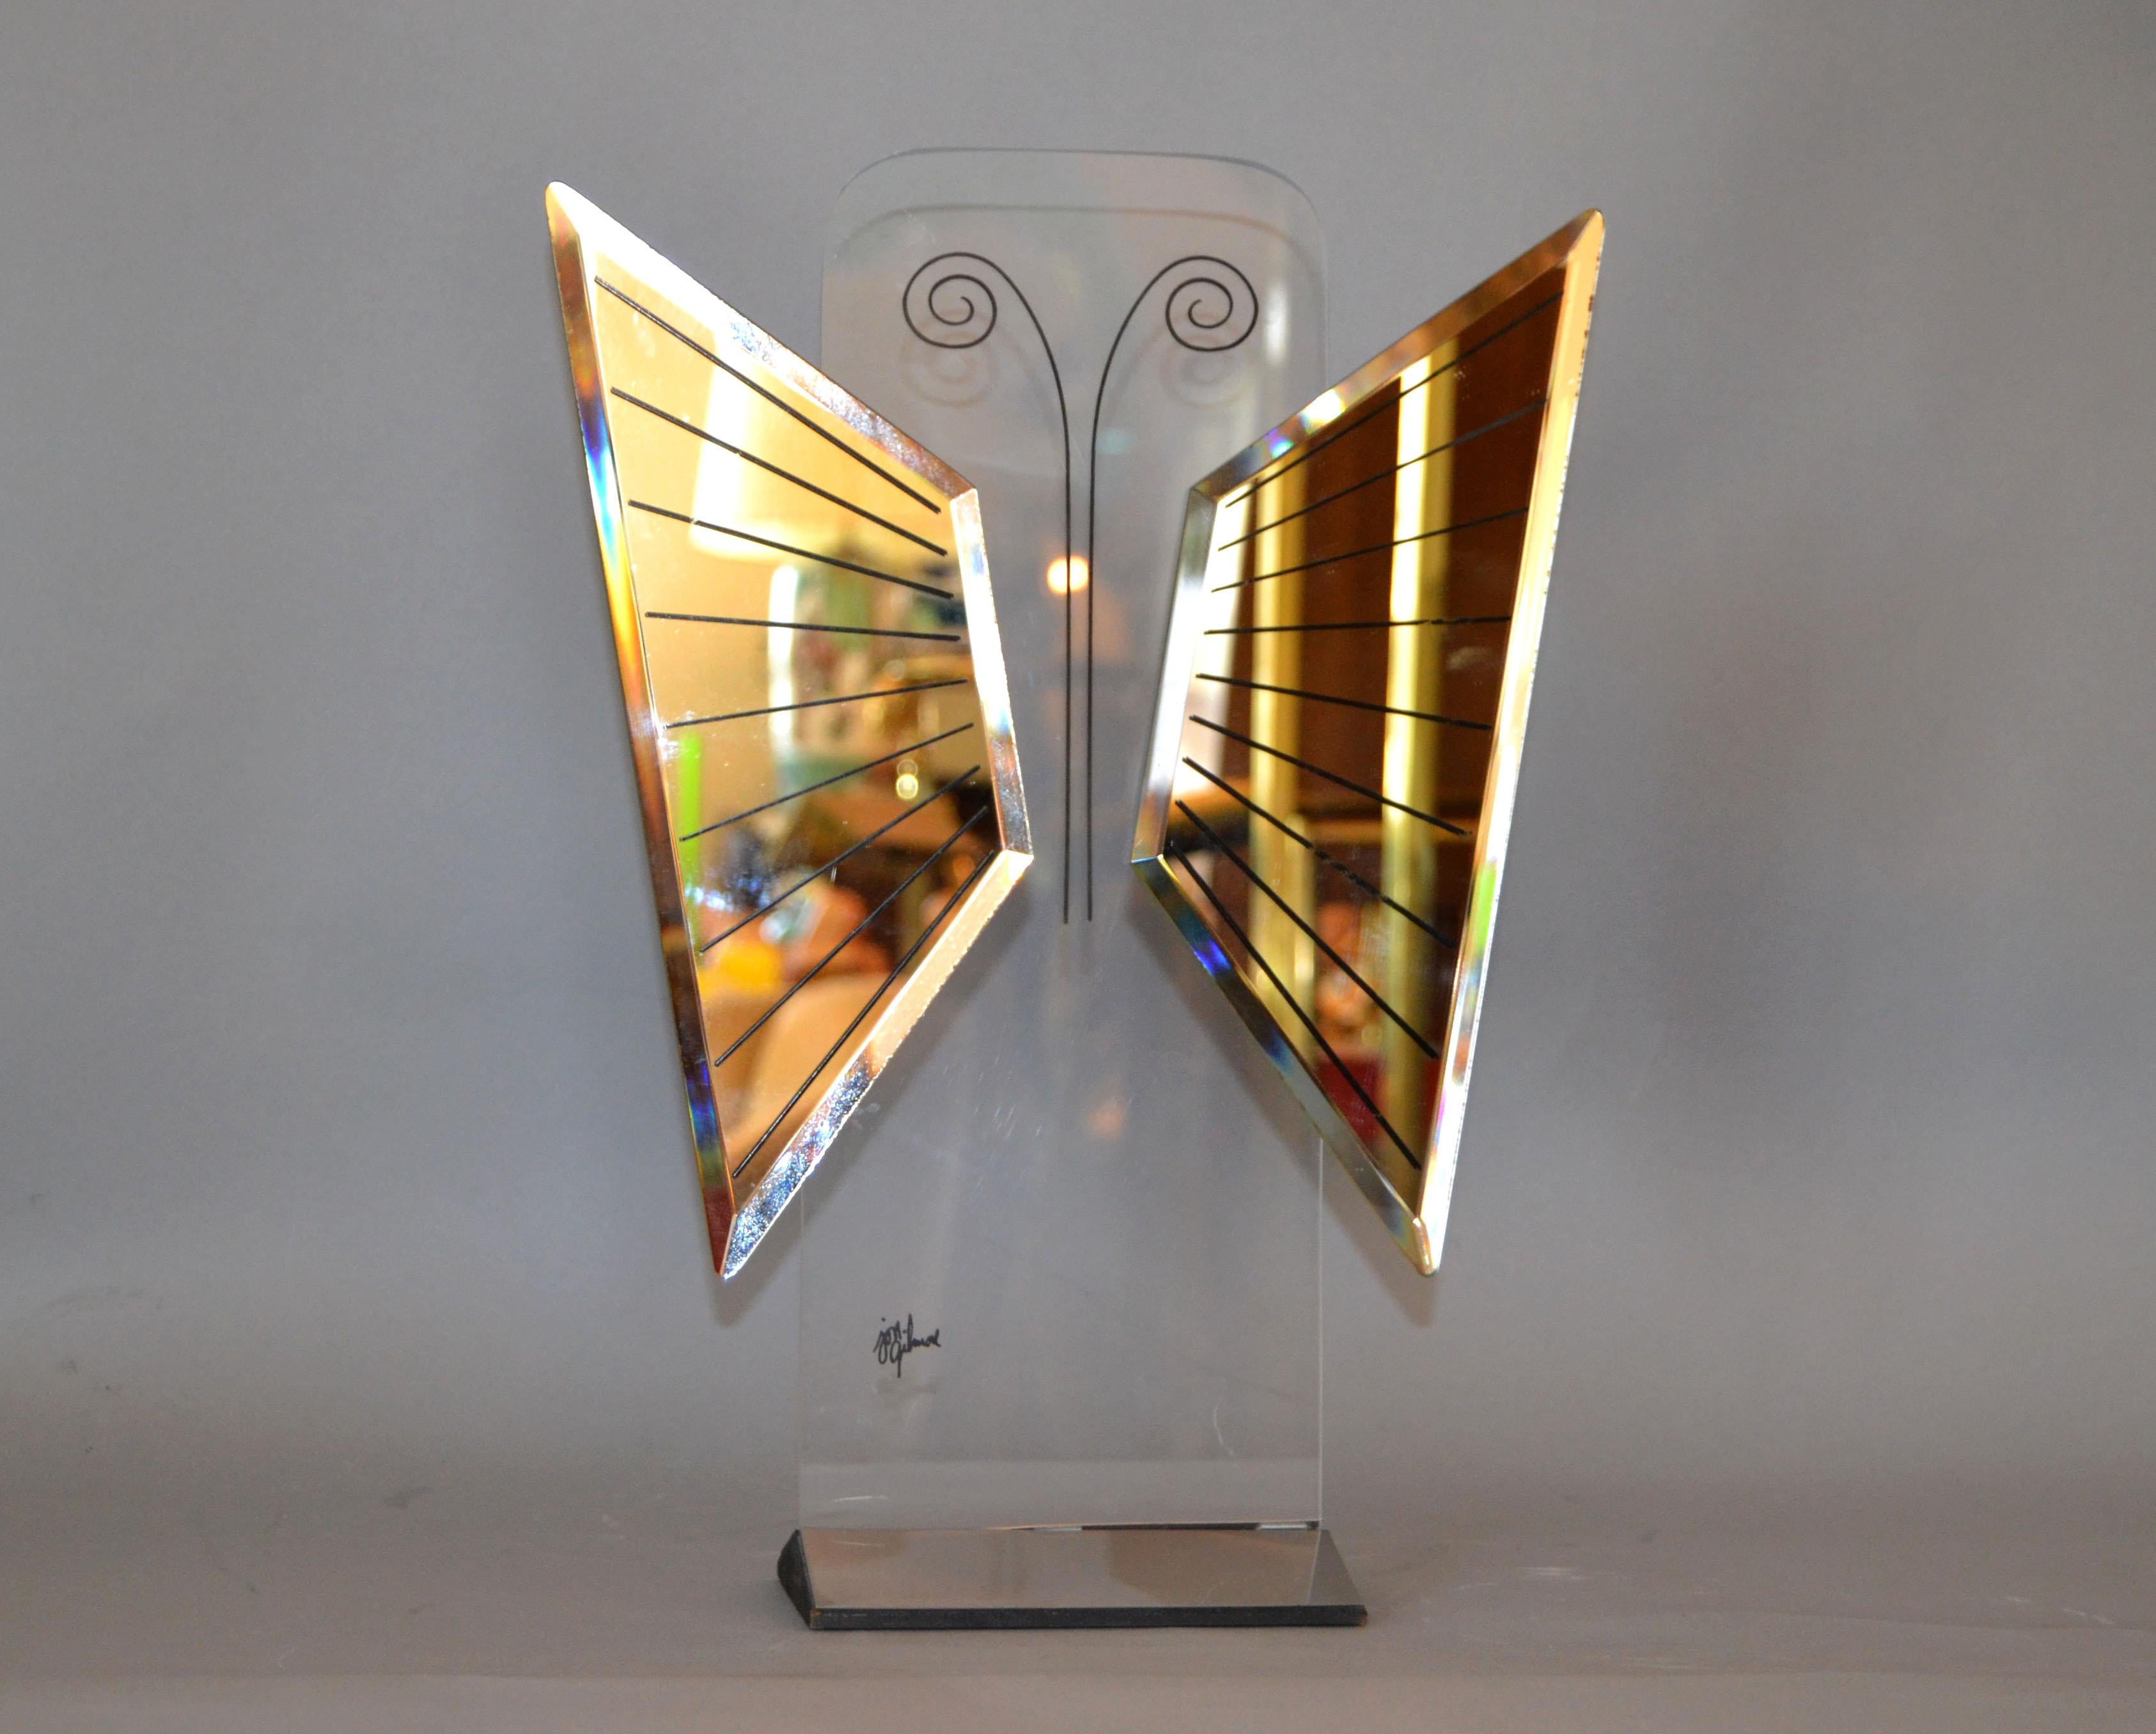 Unique Mid-Century Modern art mirror sculpture in chrome and Lucite shaped in form of a butterfly.
Signed by the Artist Jon Gilmore on the Lucite.
Beautiful for your vanity or boudoir.